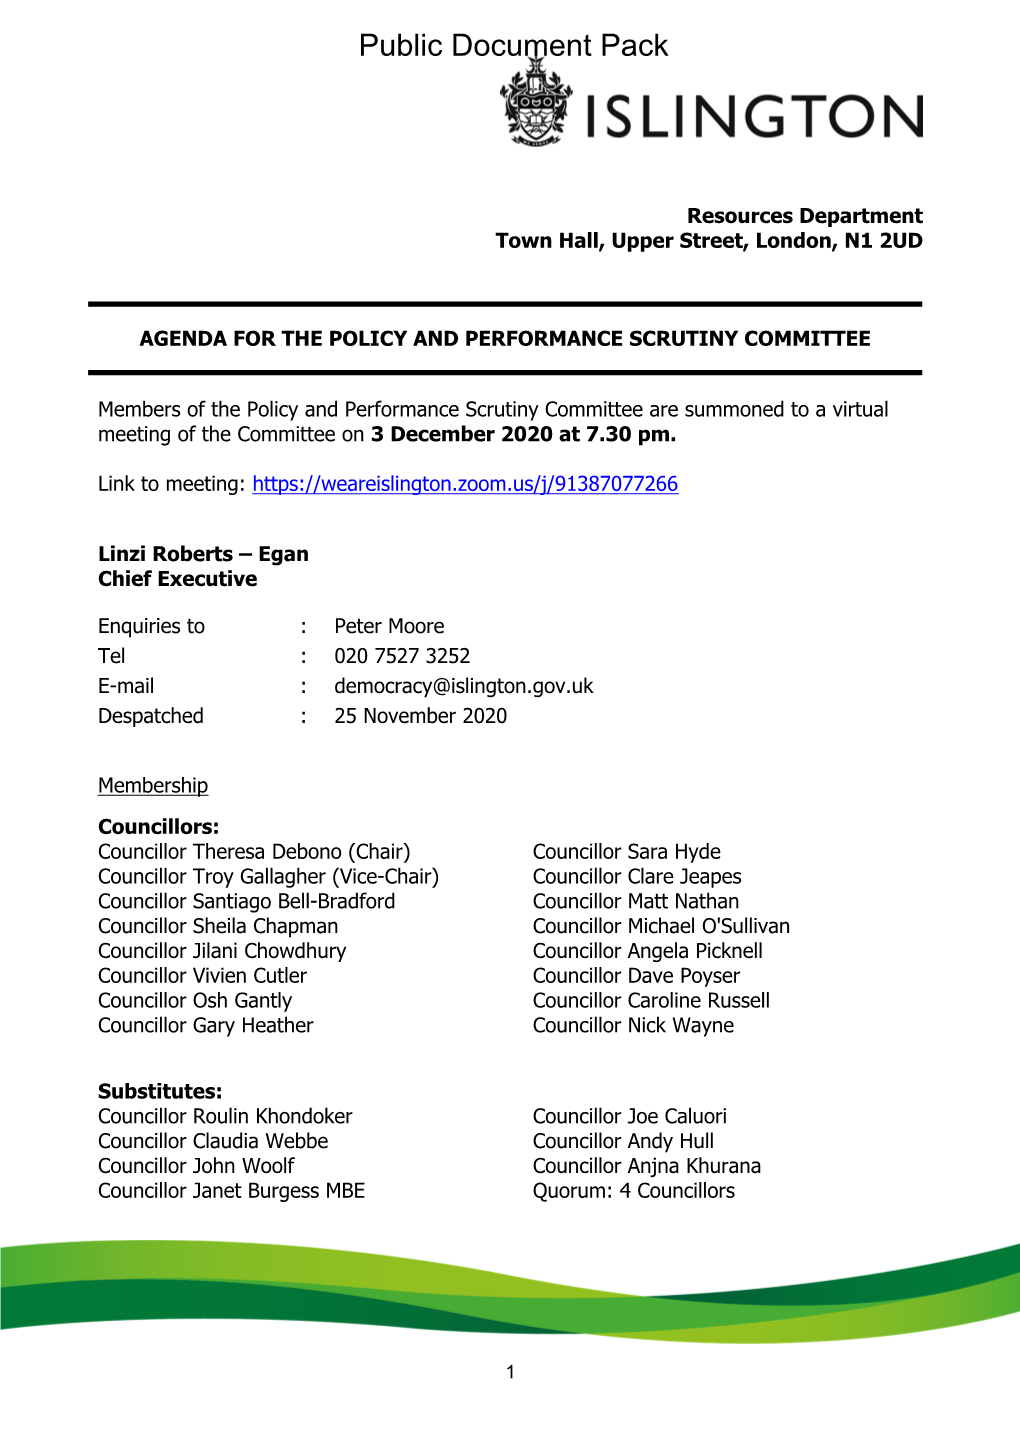 (Public Pack)Agenda Document for Policy and Performance Scrutiny